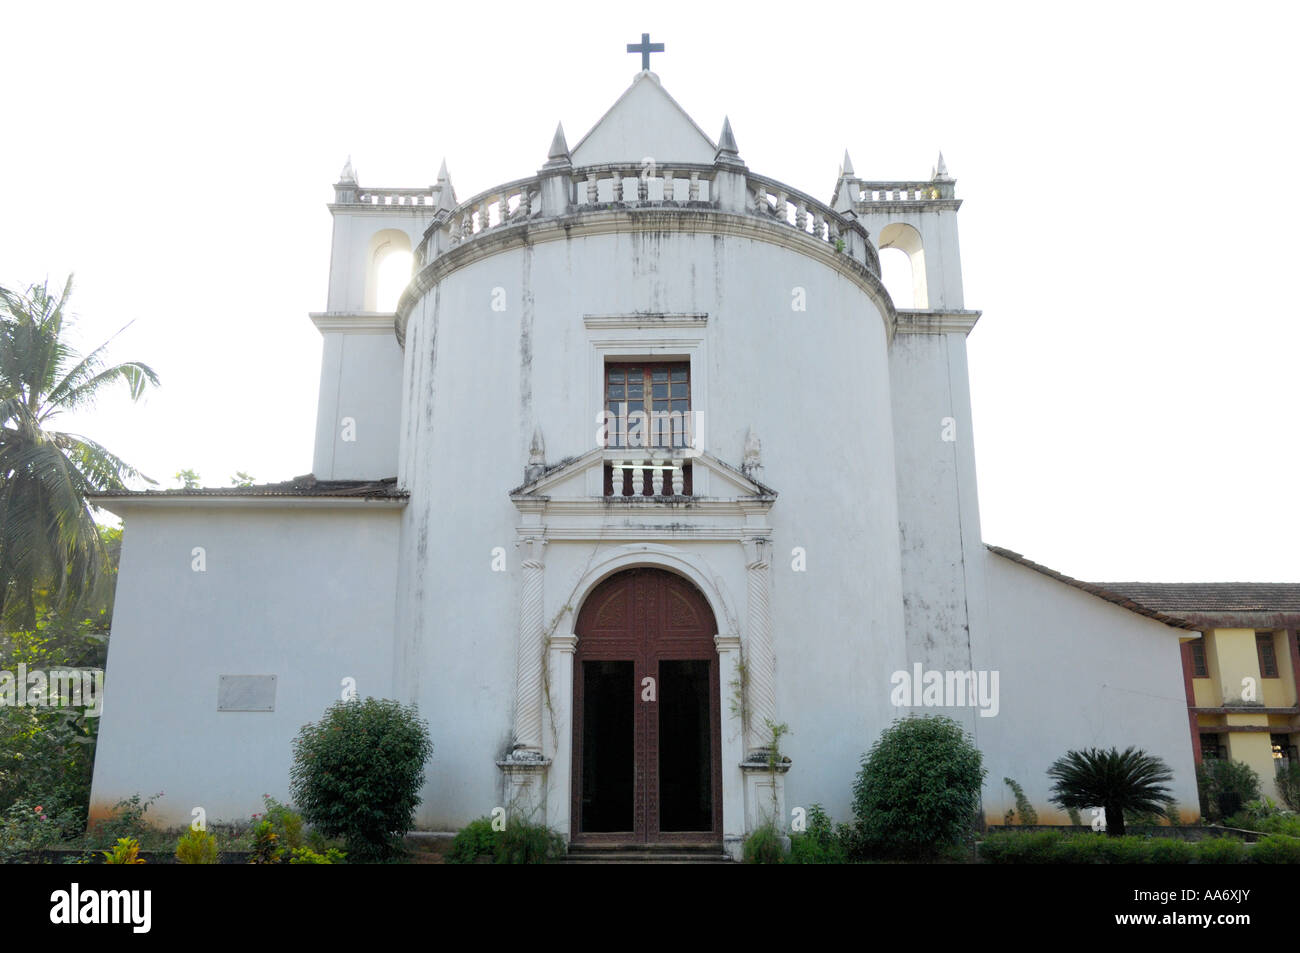 St. Anthony Royal Chapel Old Goa Indien Stockfoto